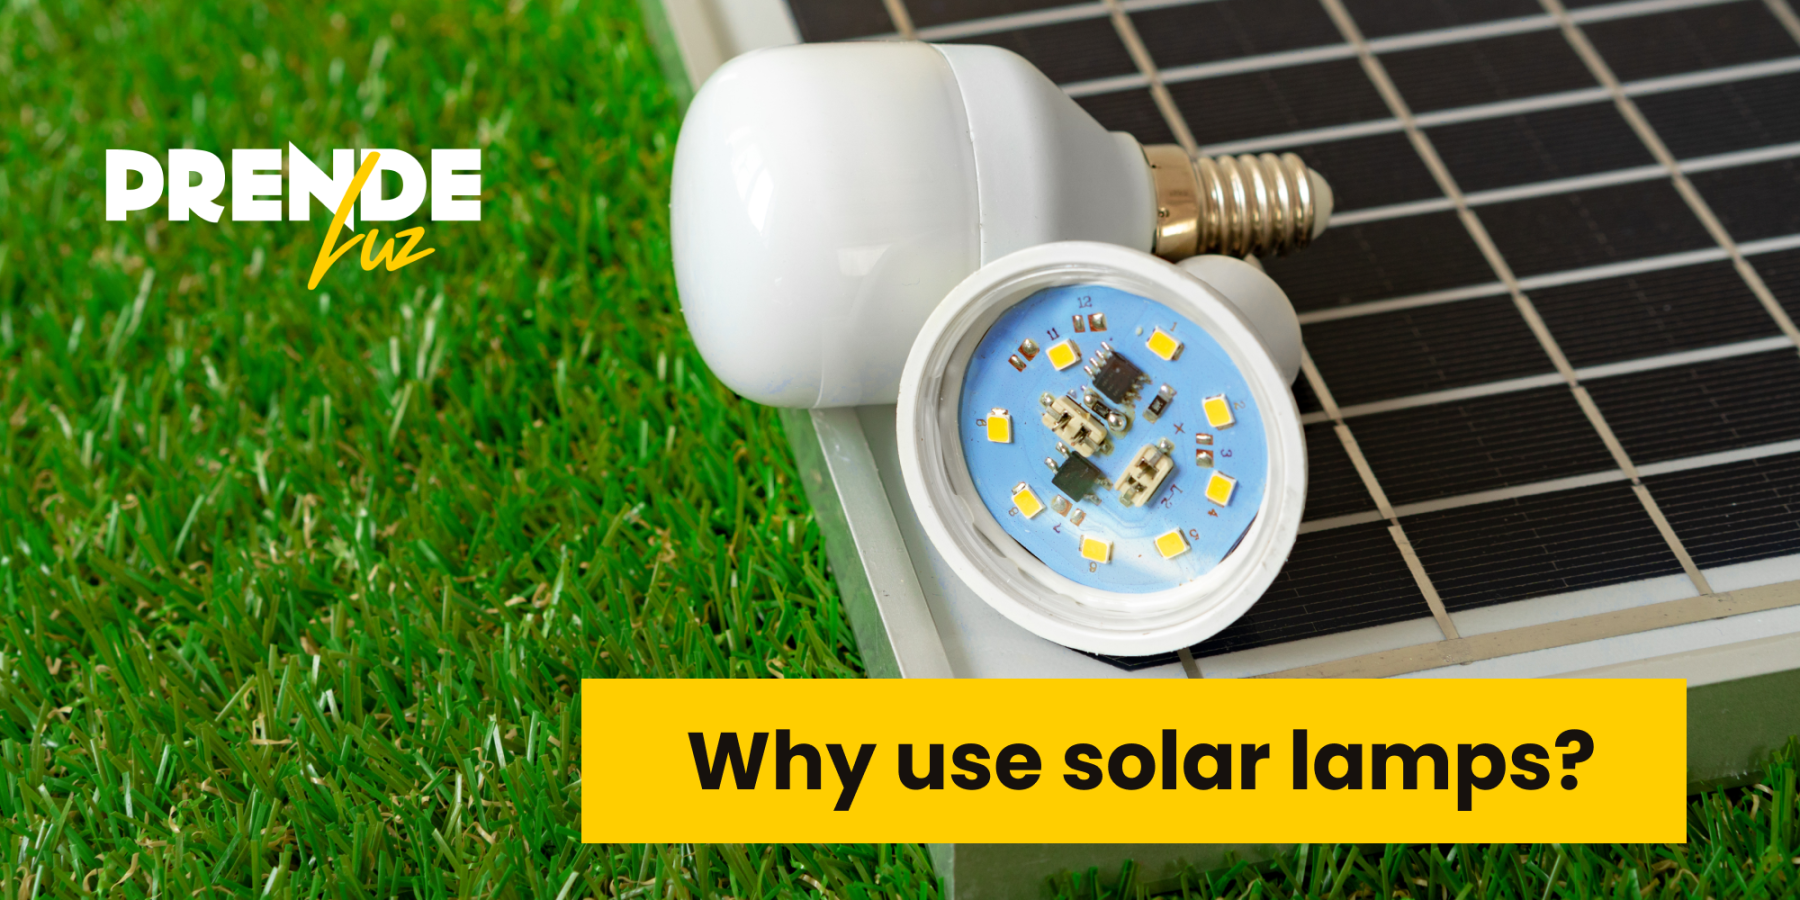 Learn about the advantages of solar lamps at home